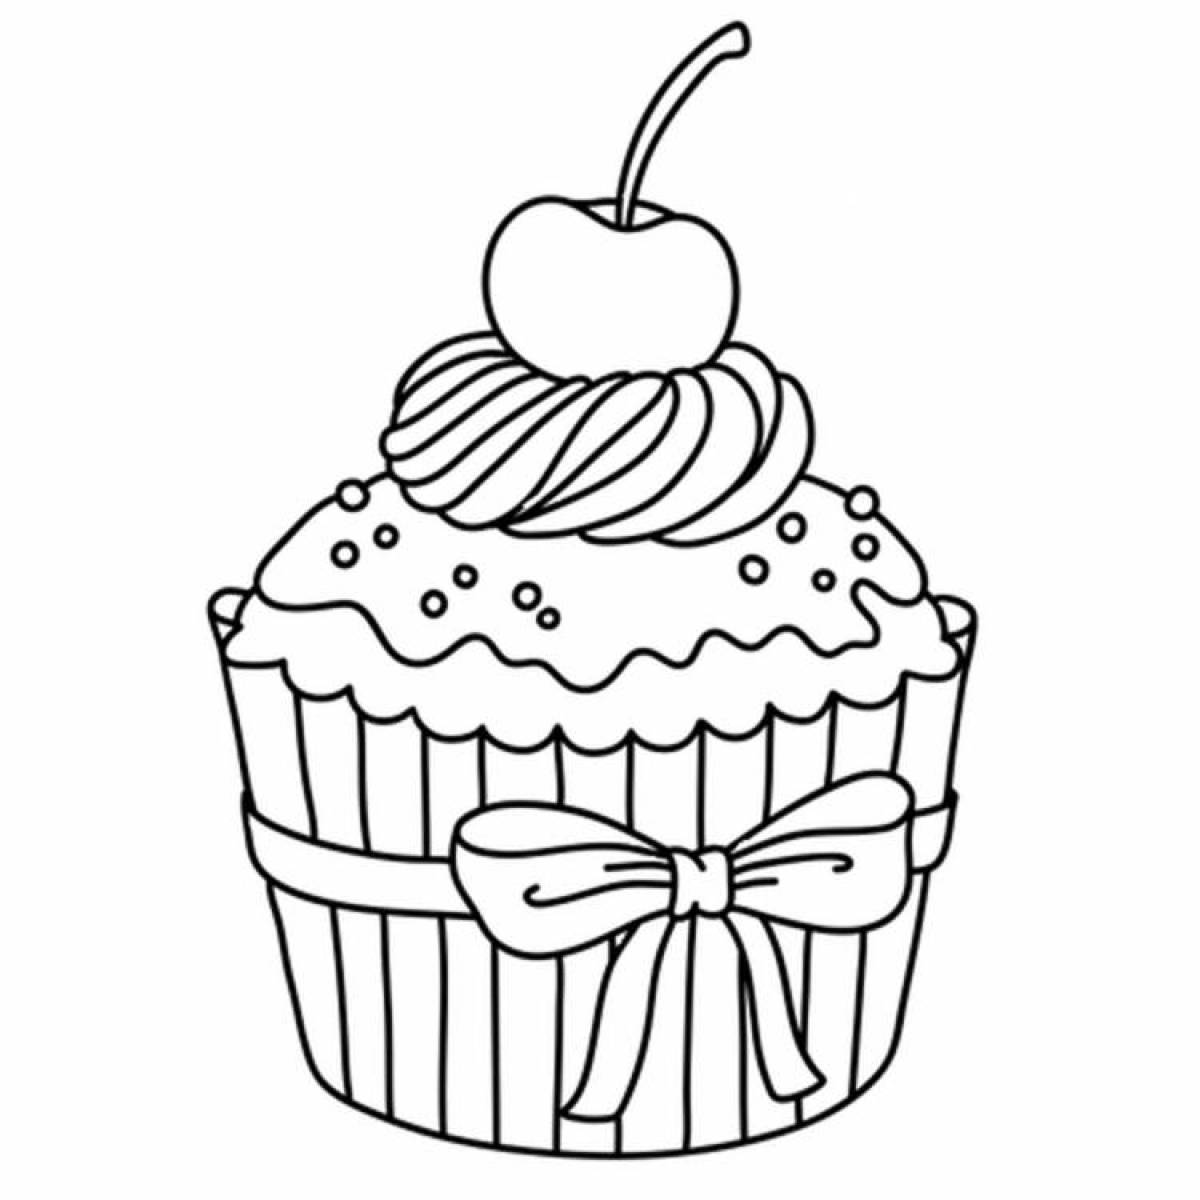 Exciting cupcake coloring